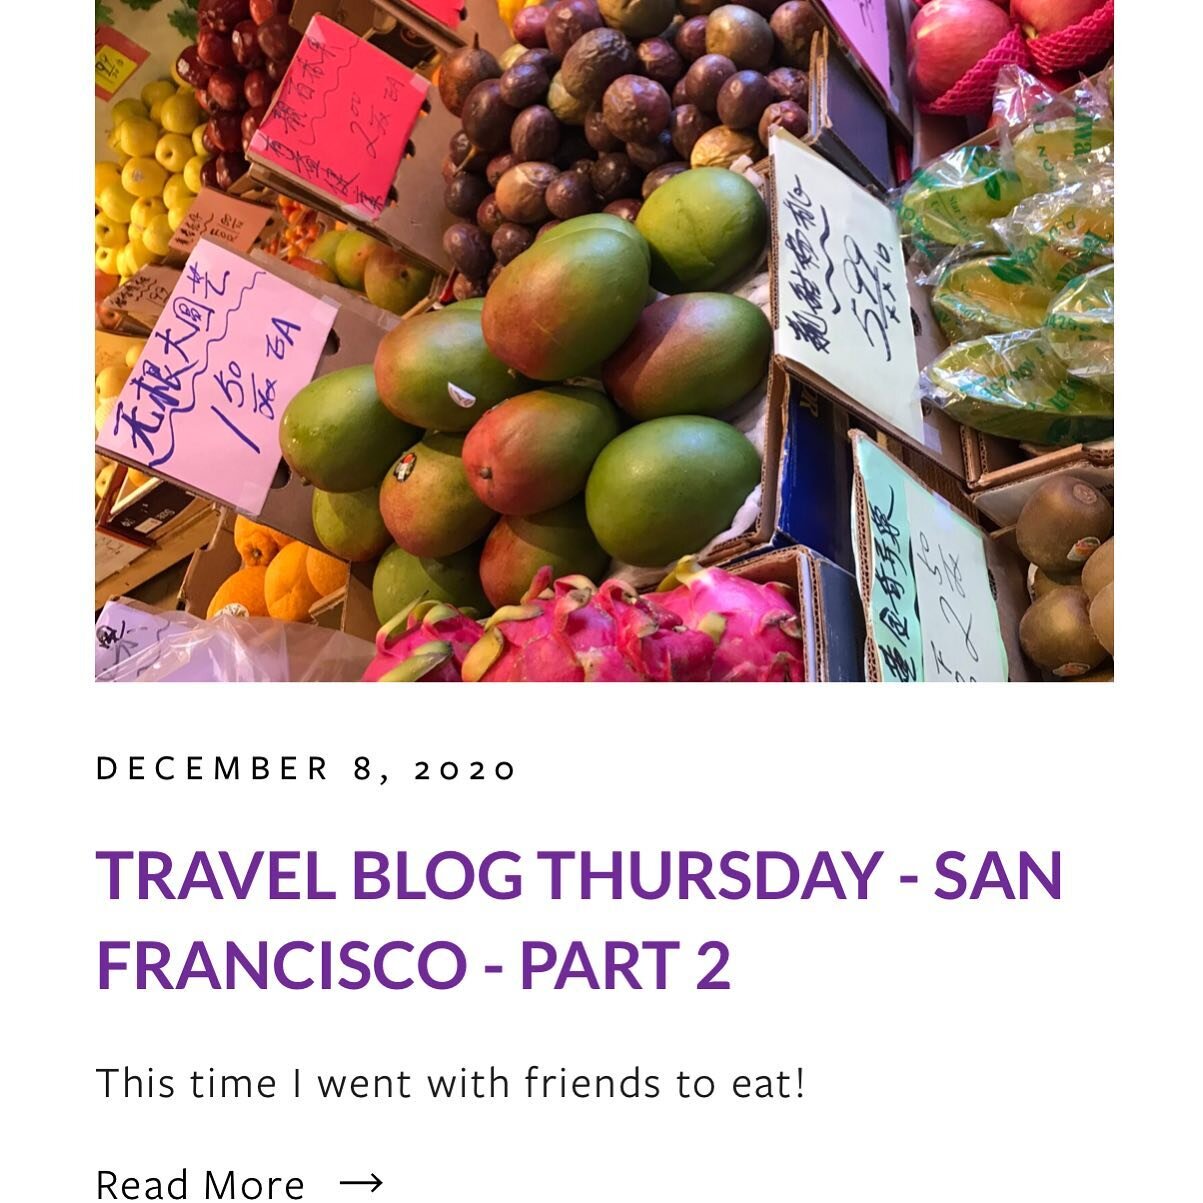 SAN FRANCISCO - PART 2  Finally wrote down part two of San Fran... we just ate a bunch! It was fabulous!  Travel Blog Thursdays  Taste Tutor  Link in bio
.
.
.
#TasteTutor #Chef #Food #Cooking #SanFran #Seattle #Eat #SanFrancisco #Foodie #FoodPorn #B